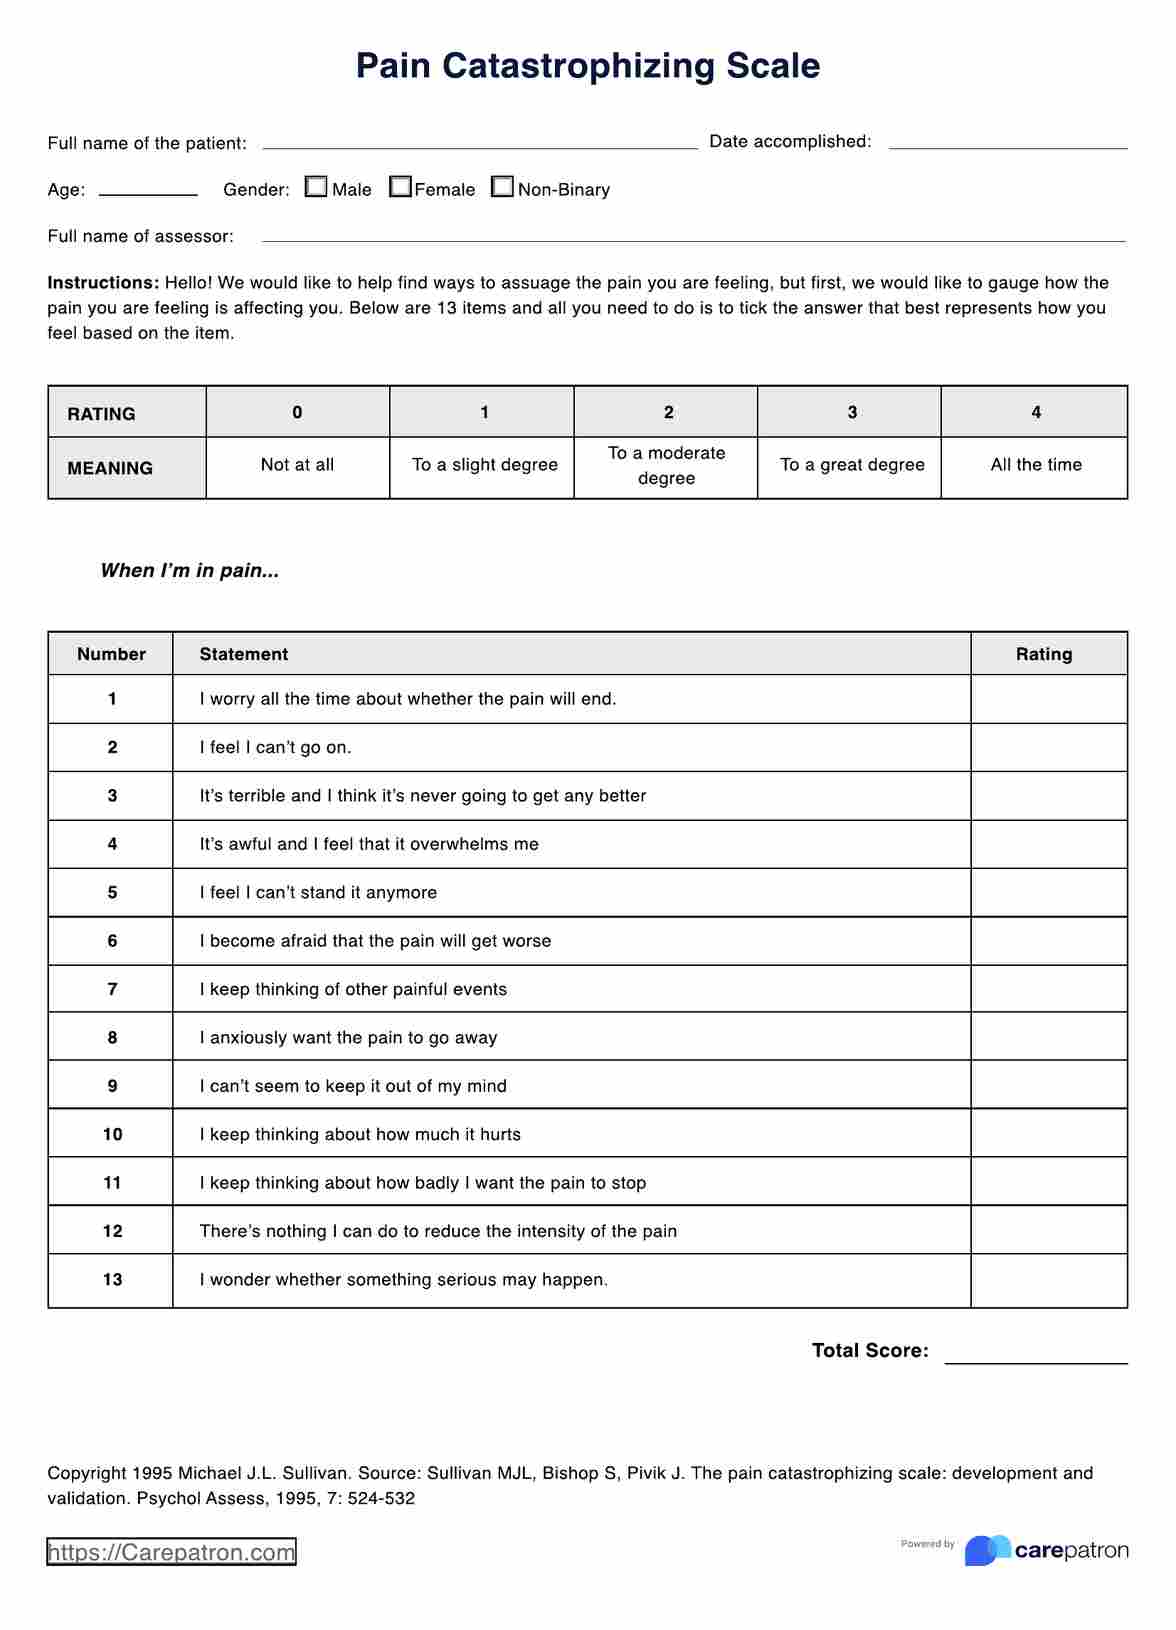 Pain Catastrophizing Scale PDF Example